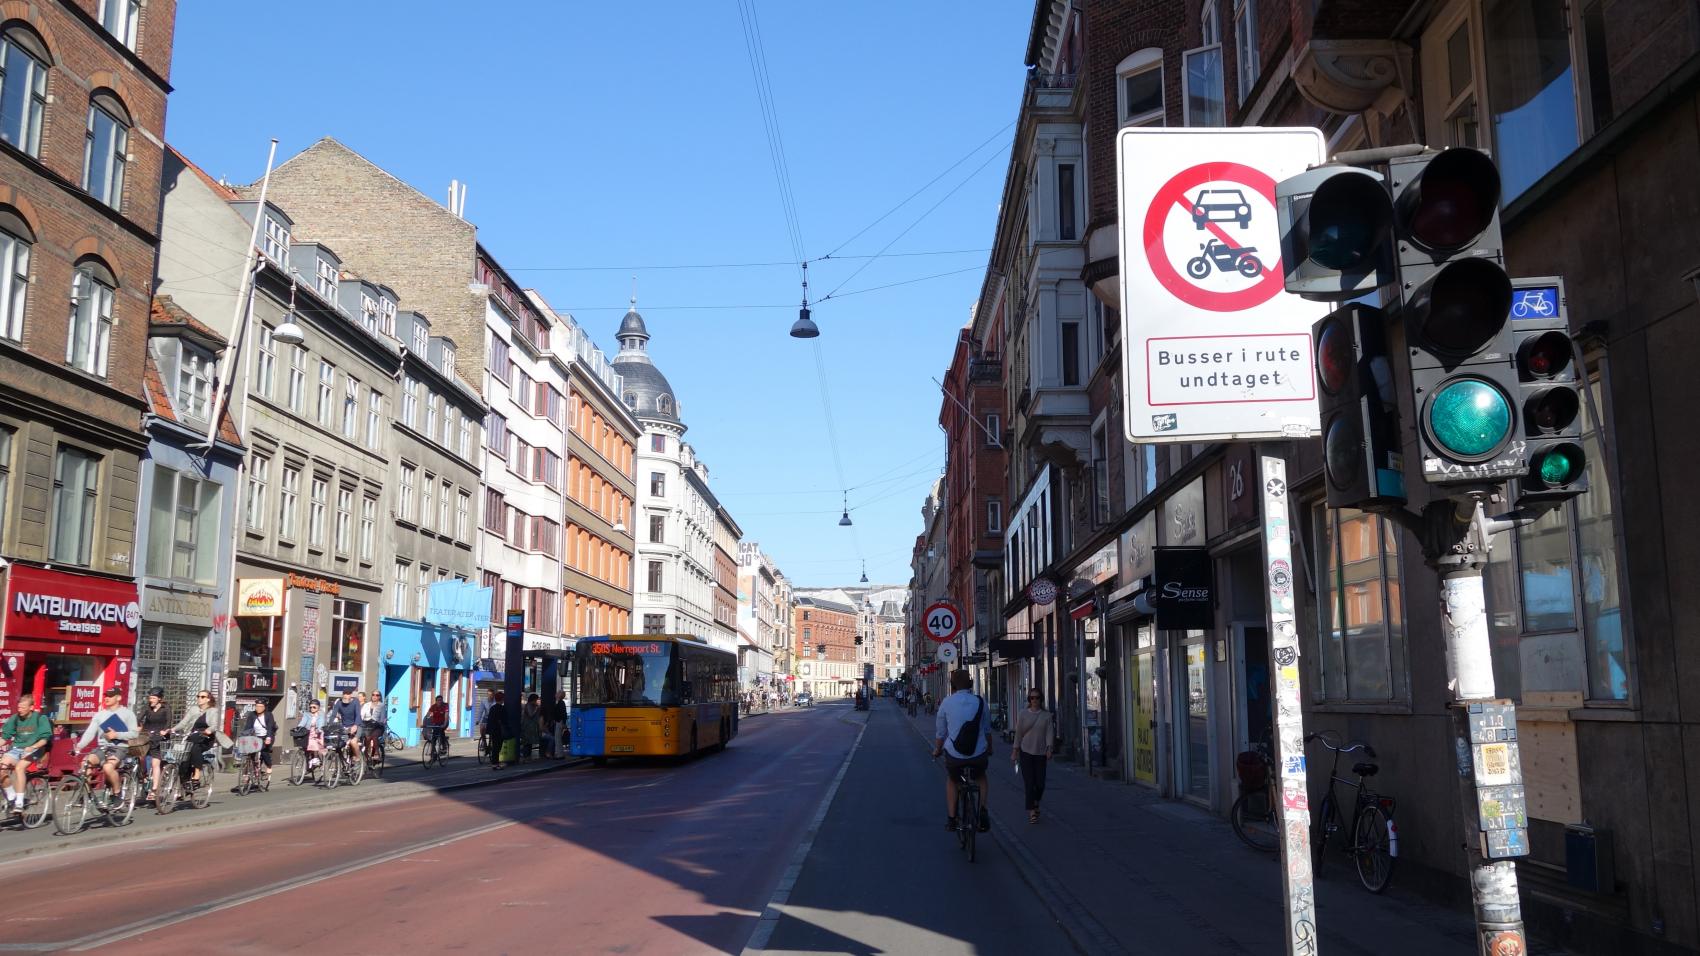 One of the sections of Nørrebrogade closed to motorised traffic. Only bicycles and busses are allowed through the next 100 m.